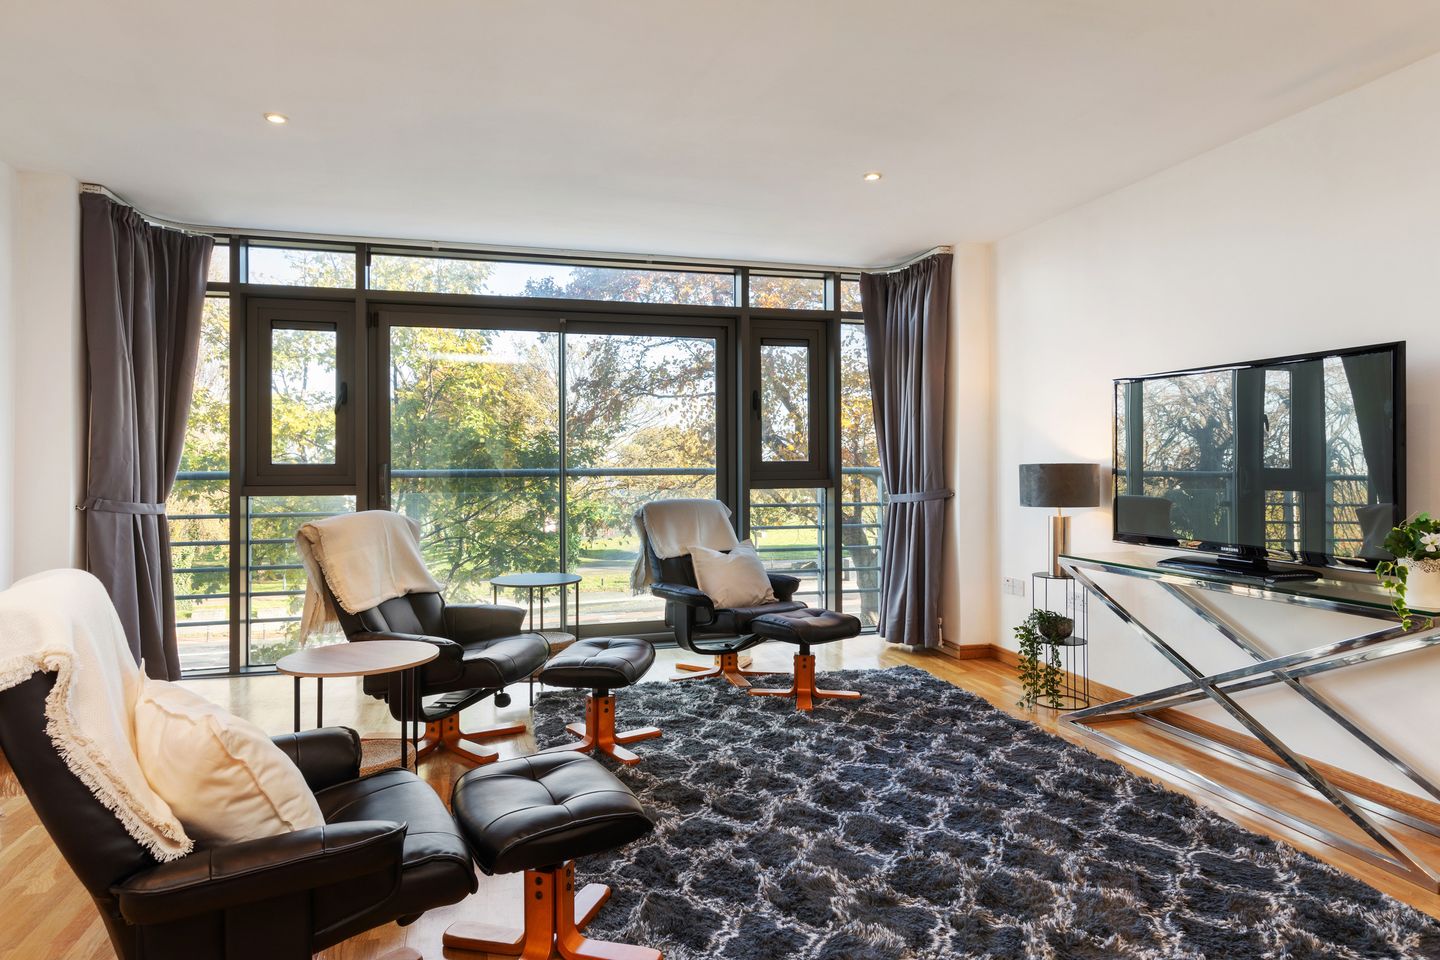 Apartment 9 Block A, Booterstown Hall, Booterstown, Co. Dublin, A94XY82